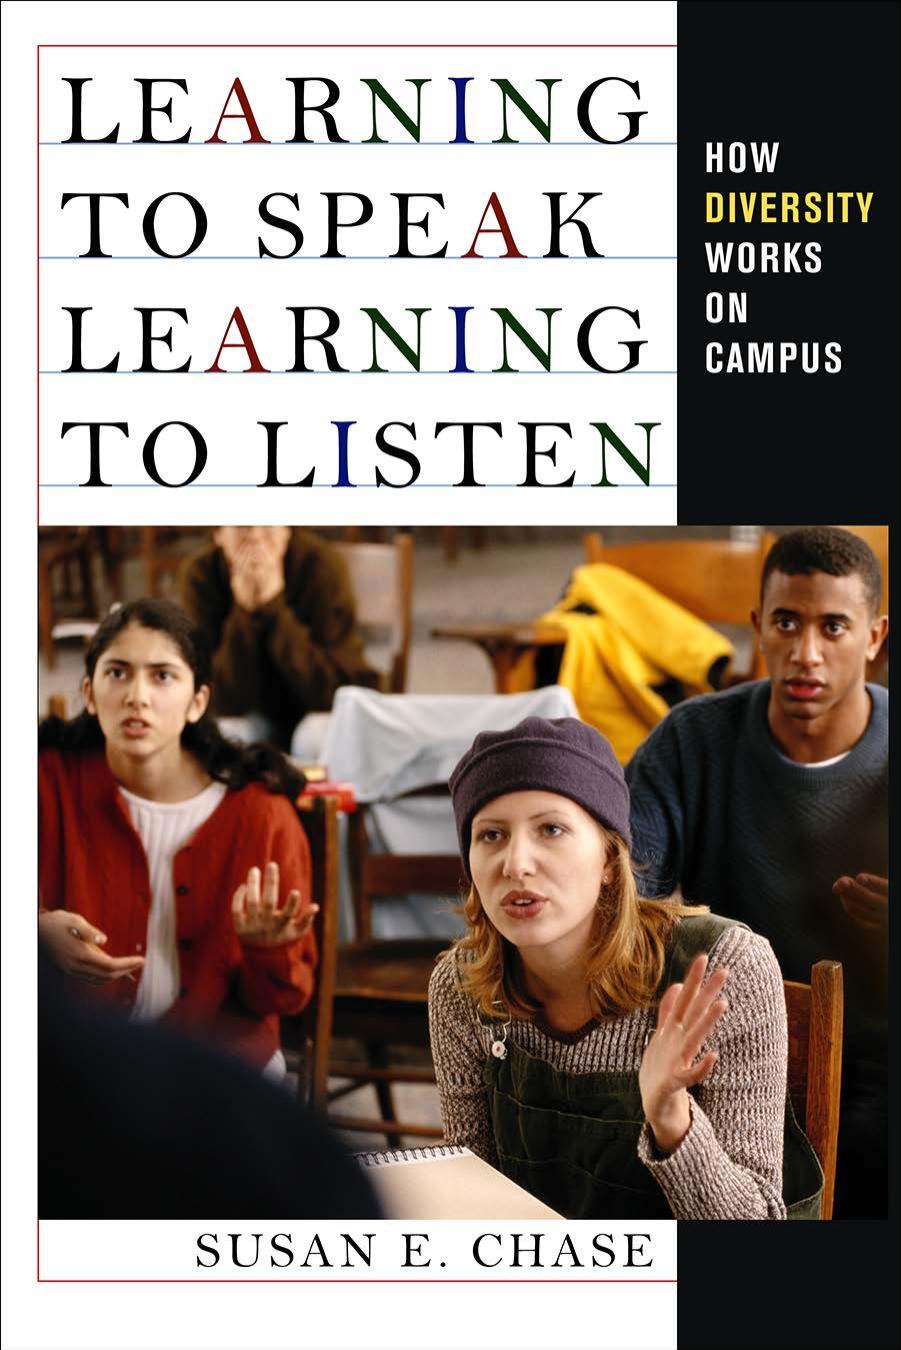 Learning to Speak, Learning to Listen: How Diversity Works on Campus by by Susan E. Chase